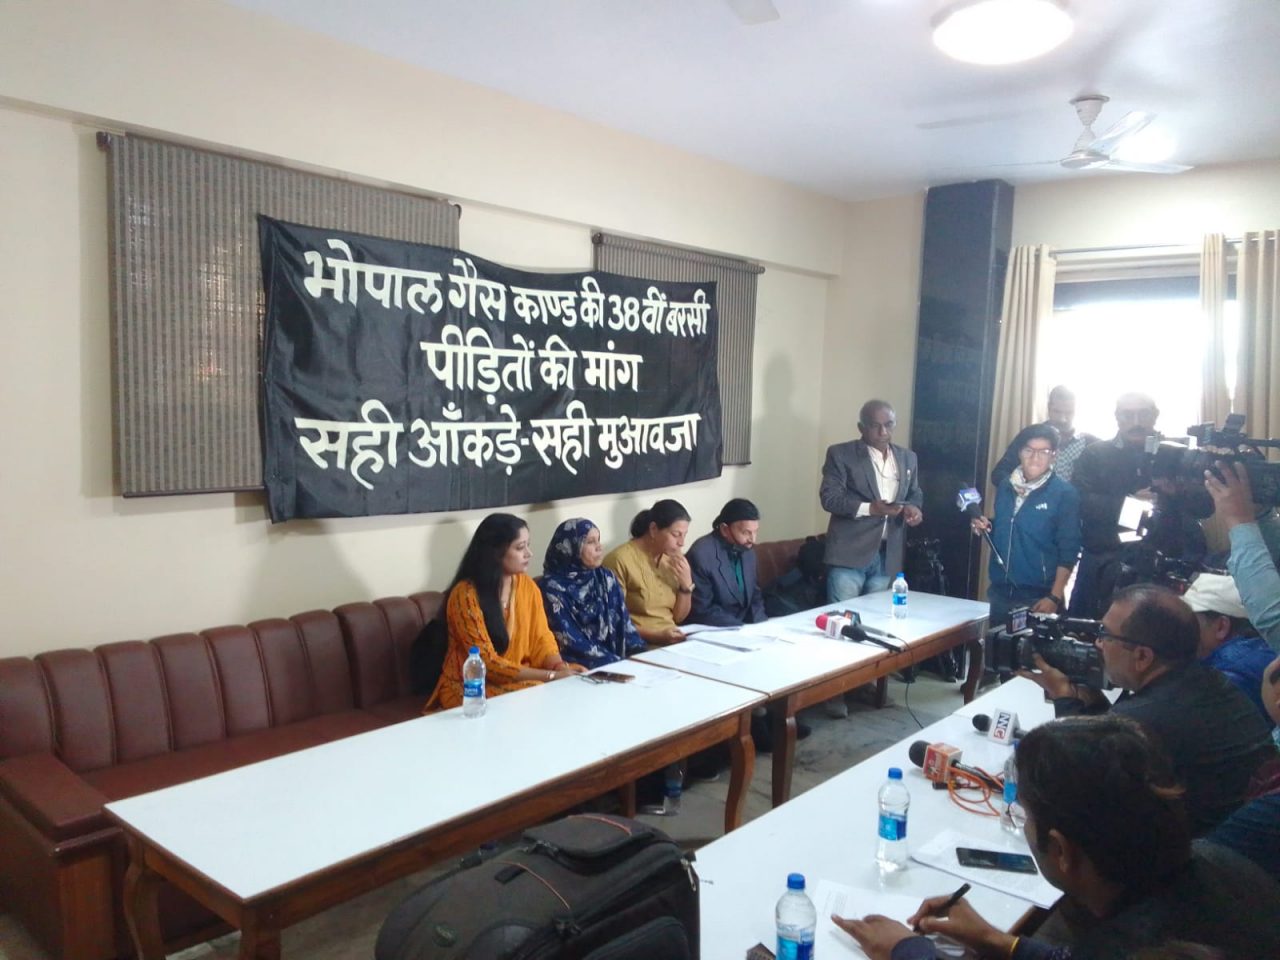 Leaders of five survivors Bhopal Gas Tragedy organizations addressing Press Conference in Bhopal.